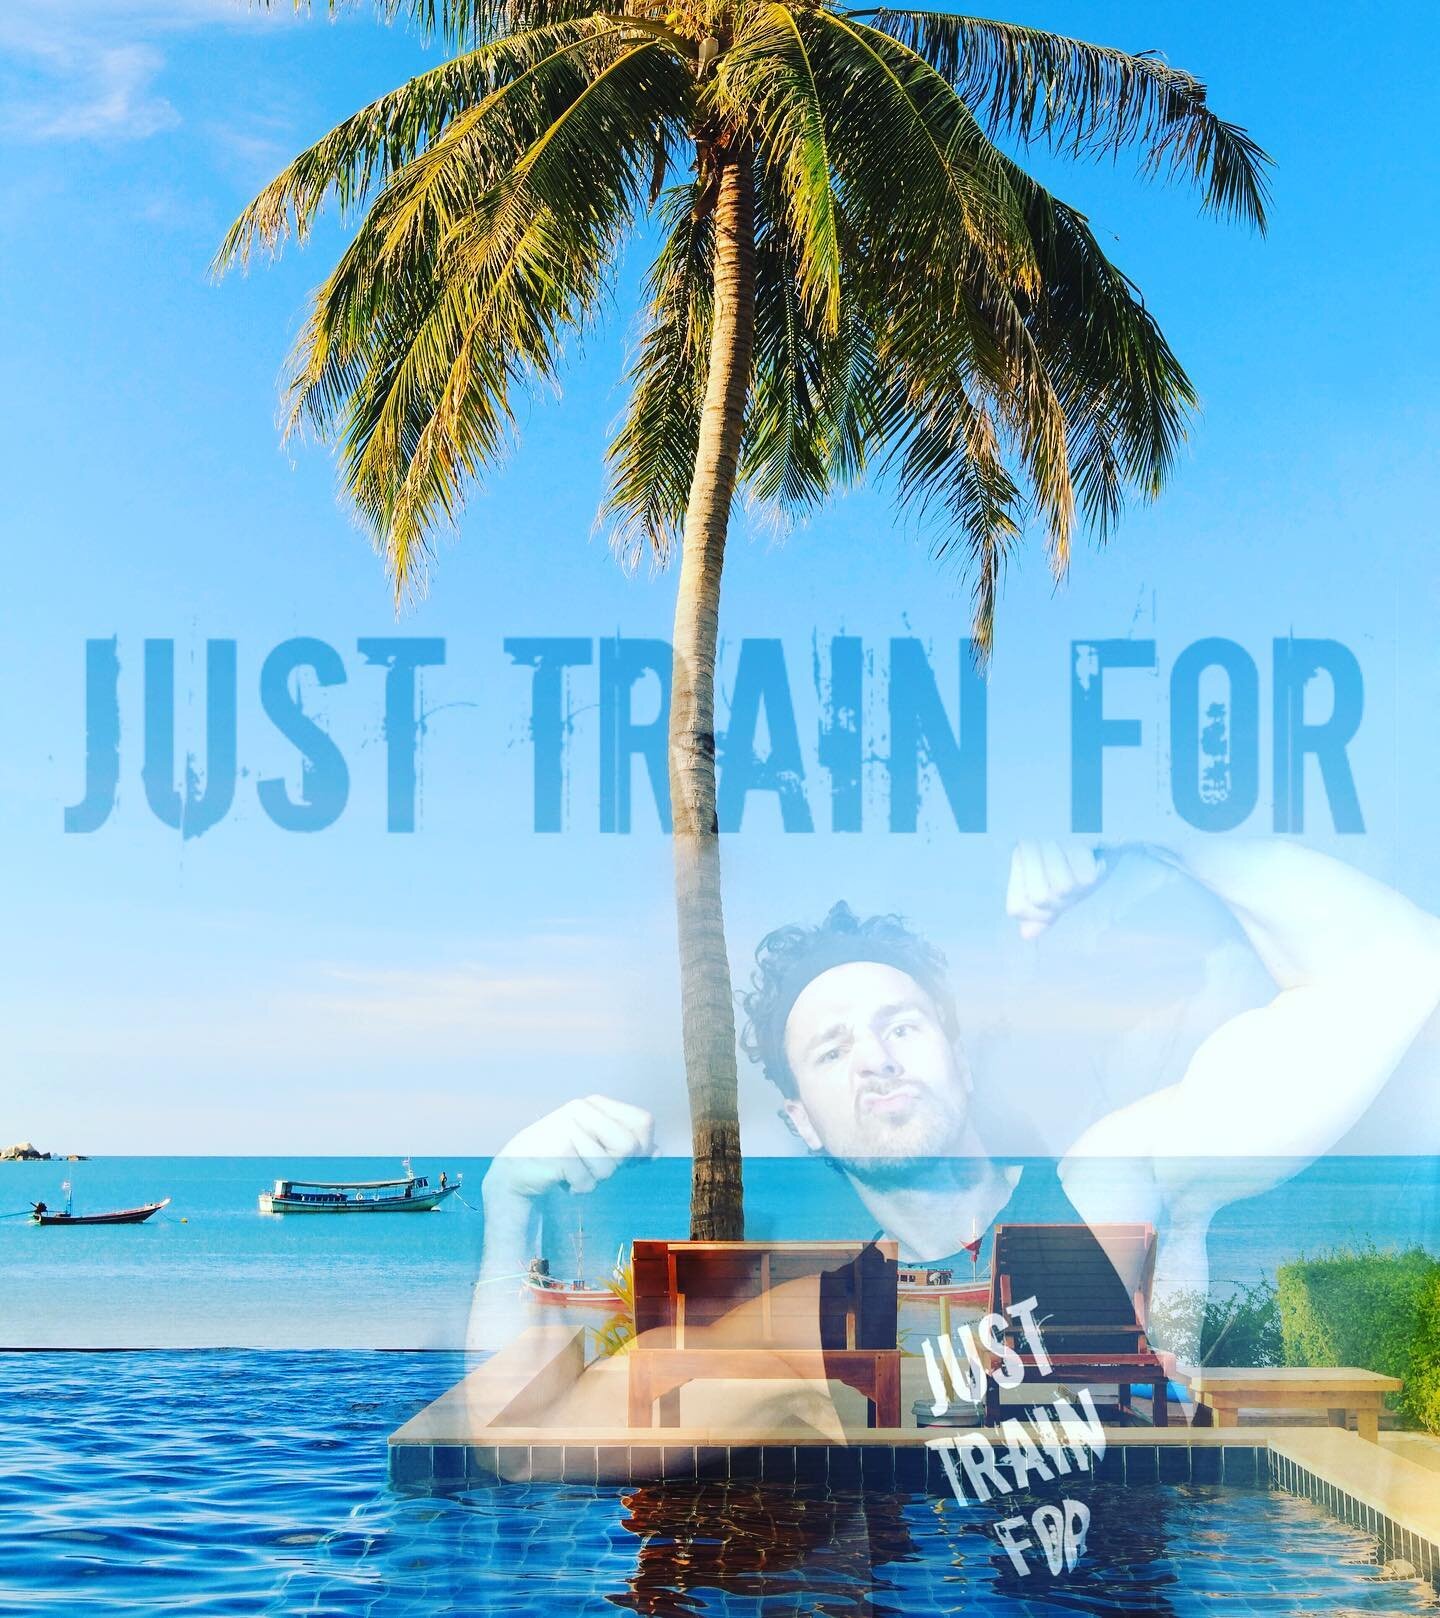 Countdown to summer is on. Have you been wanting to make some changes? Not sure where to start? Stuck in limbo and can&rsquo;t seem to break through this plateau? Contact me for a solution 
#justtrainfor #coach #transformation #summerbody #onlinetrai